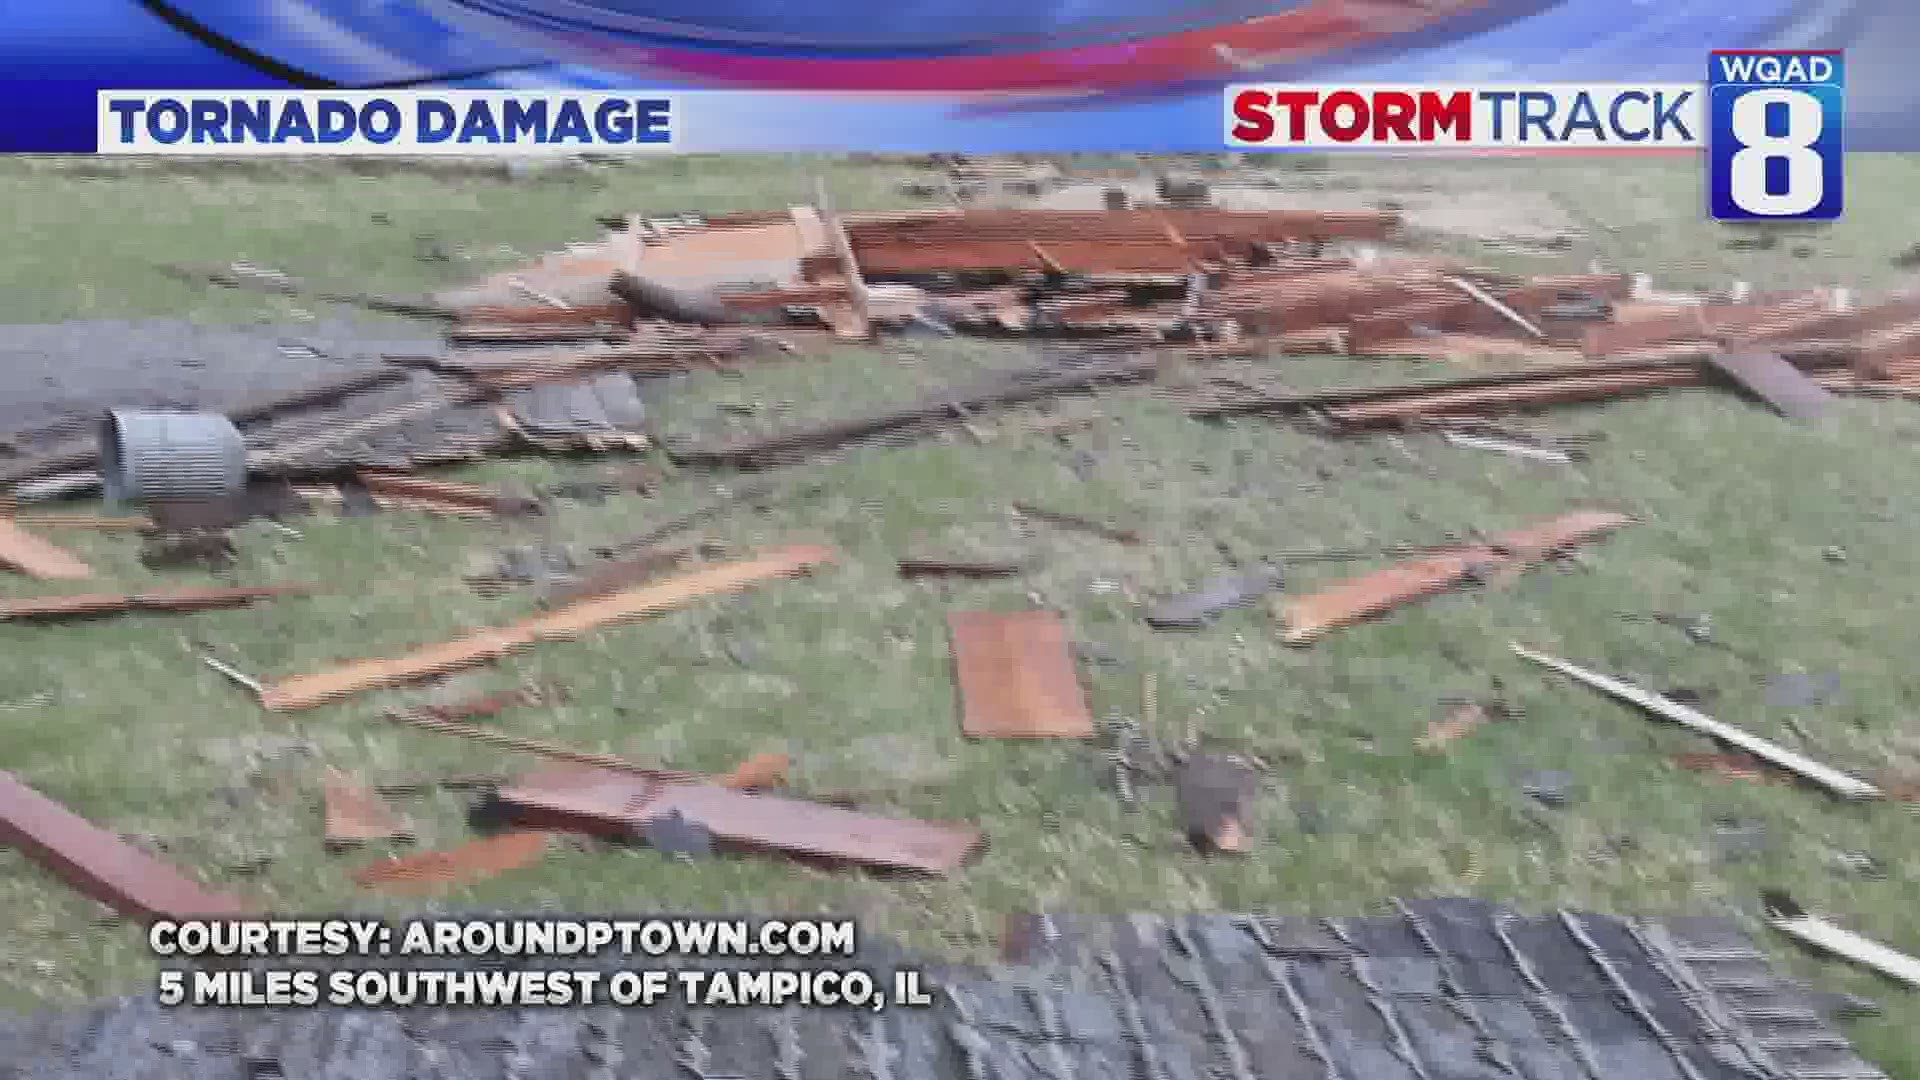 The National Weather Service has confirmed an EF-1 tornado touched down in Whiteside County Saturday evening